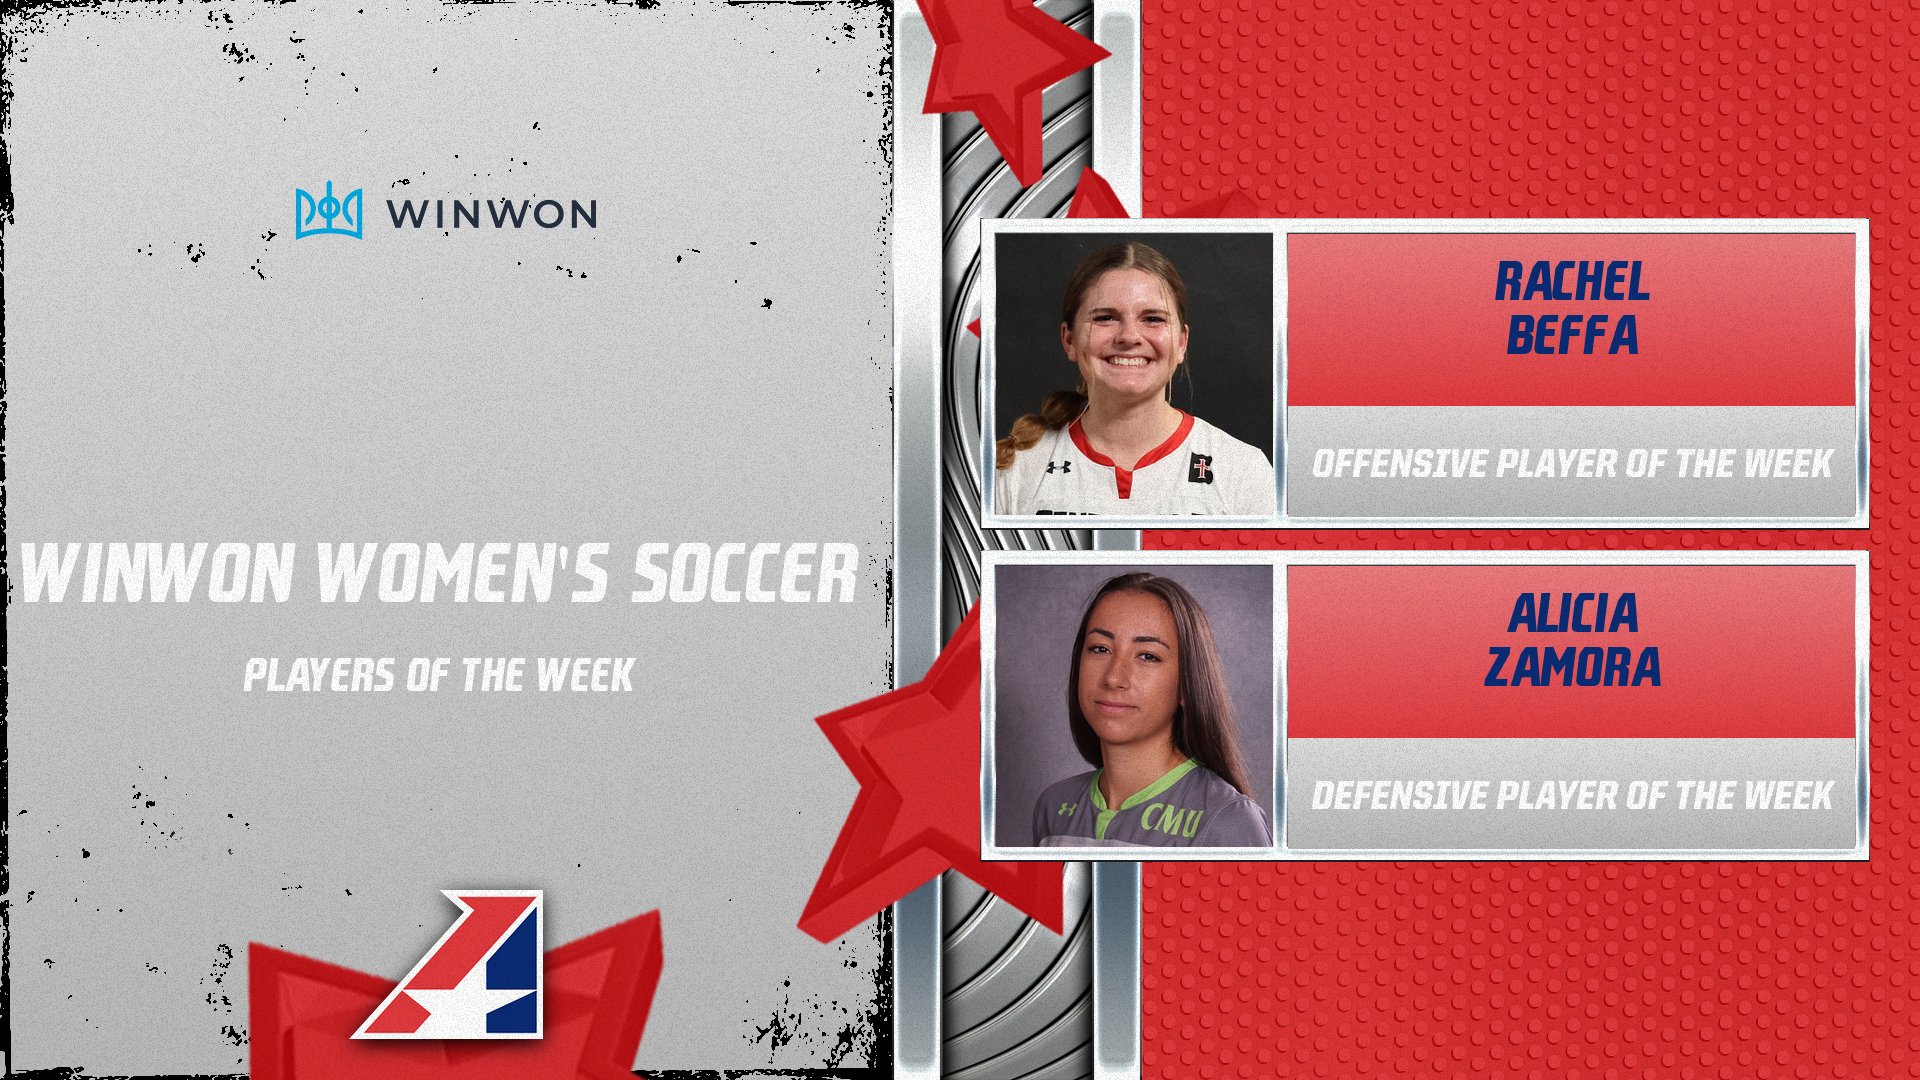 WinWon Women’s Soccer Players of the Week Announced – September 11